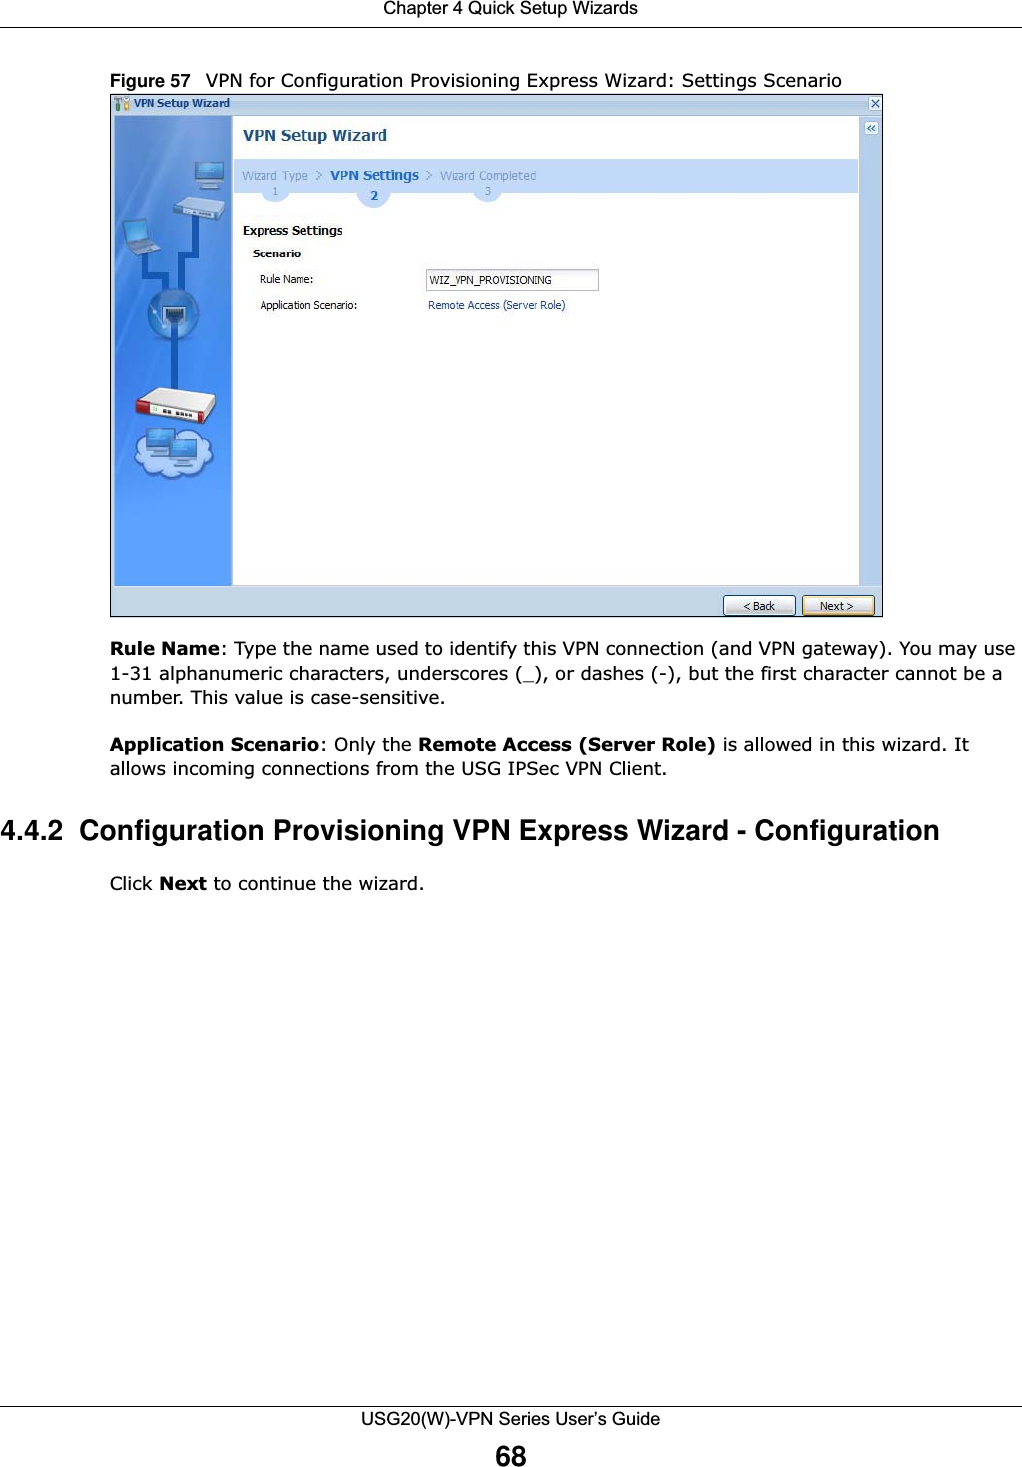 Chapter 4 Quick Setup WizardsUSG20(W)-VPN Series User’s Guide68Figure 57   VPN for Configuration Provisioning Express Wizard: Settings ScenarioRule Name: Type the name used to identify this VPN connection (and VPN gateway). You may use 1-31 alphanumeric characters, underscores (_), or dashes (-), but the first character cannot be a number. This value is case-sensitive.Application Scenario: Only the Remote Access (Server Role) is allowed in this wizard. It allows incoming connections from the USG IPSec VPN Client.4.4.2  Configuration Provisioning VPN Express Wizard - Configuration Click Next to continue the wizard.